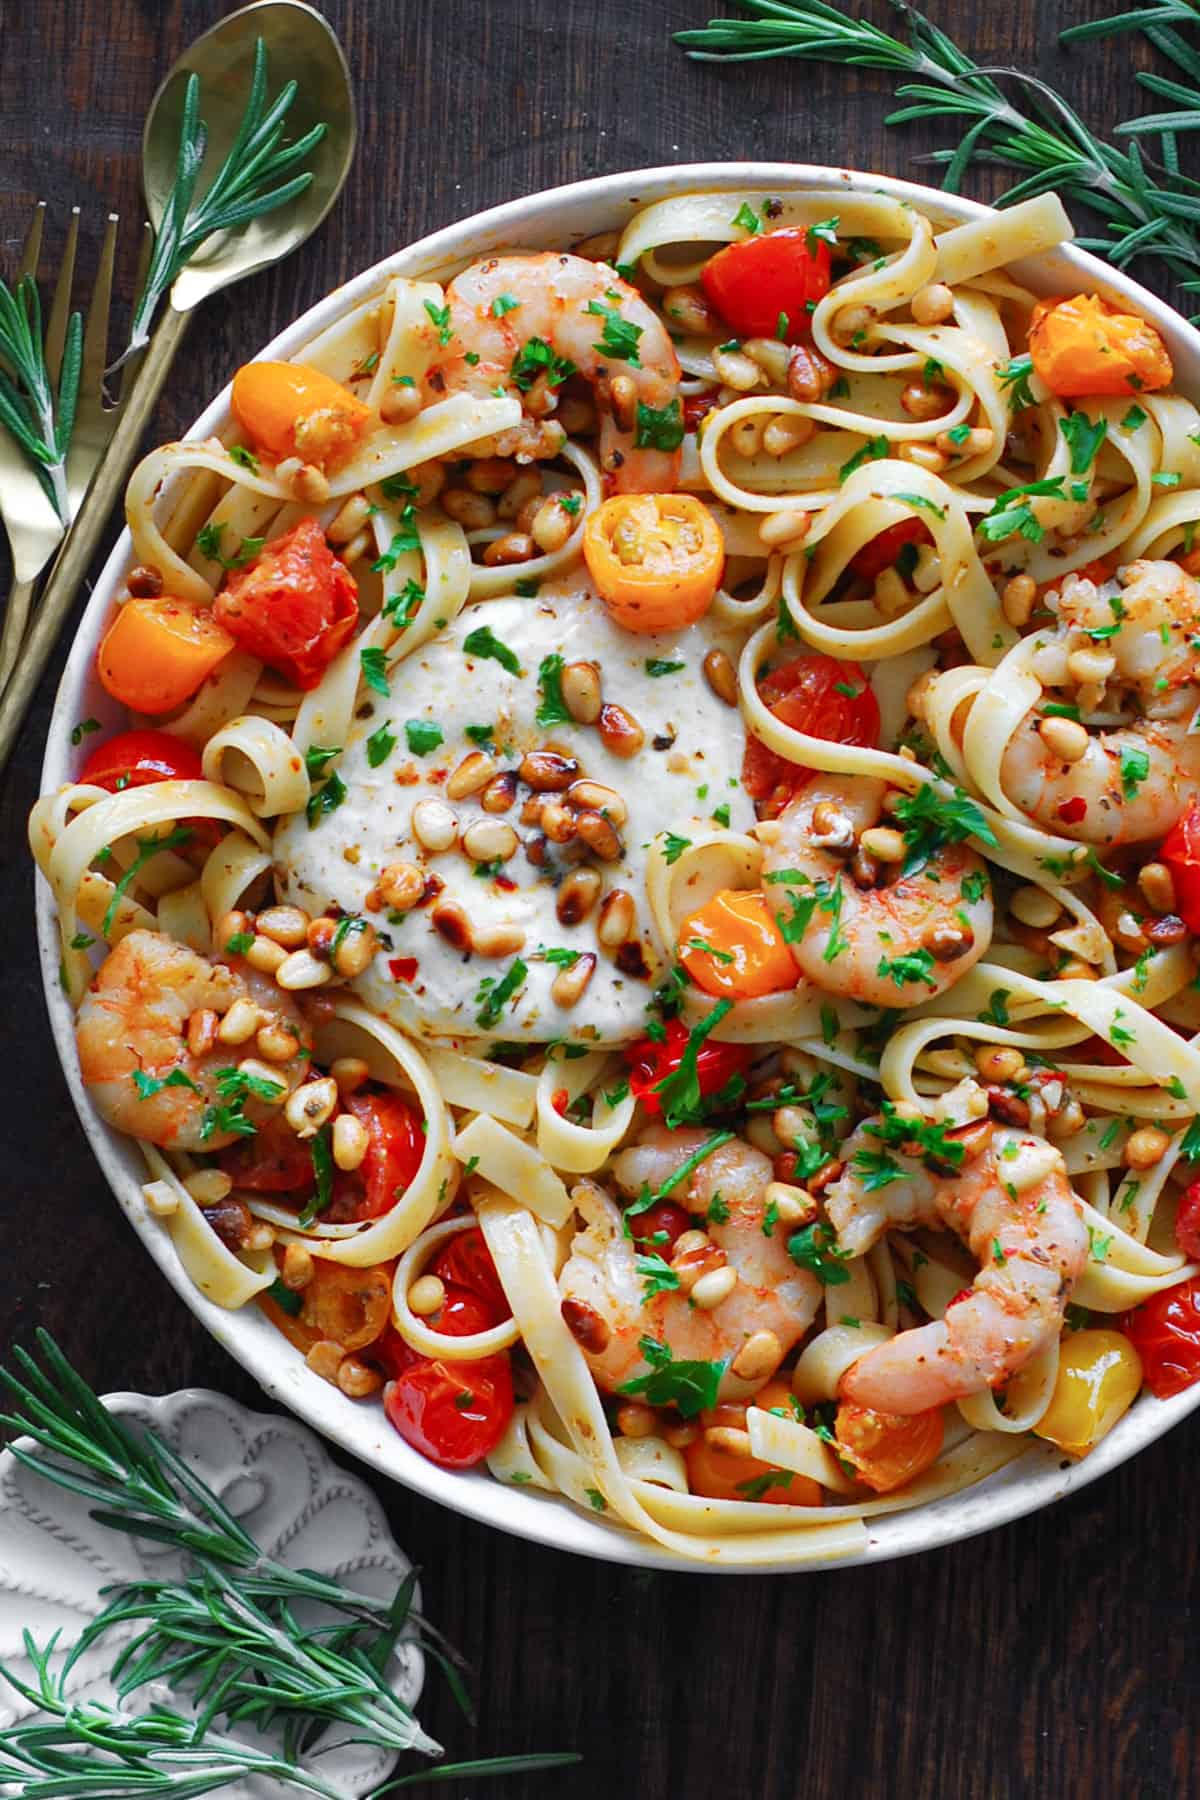 Mediterranean Shrimp Pasta with Cherry Tomatoes, Burrata Cheese, and Pine Nuts - on a white plate.